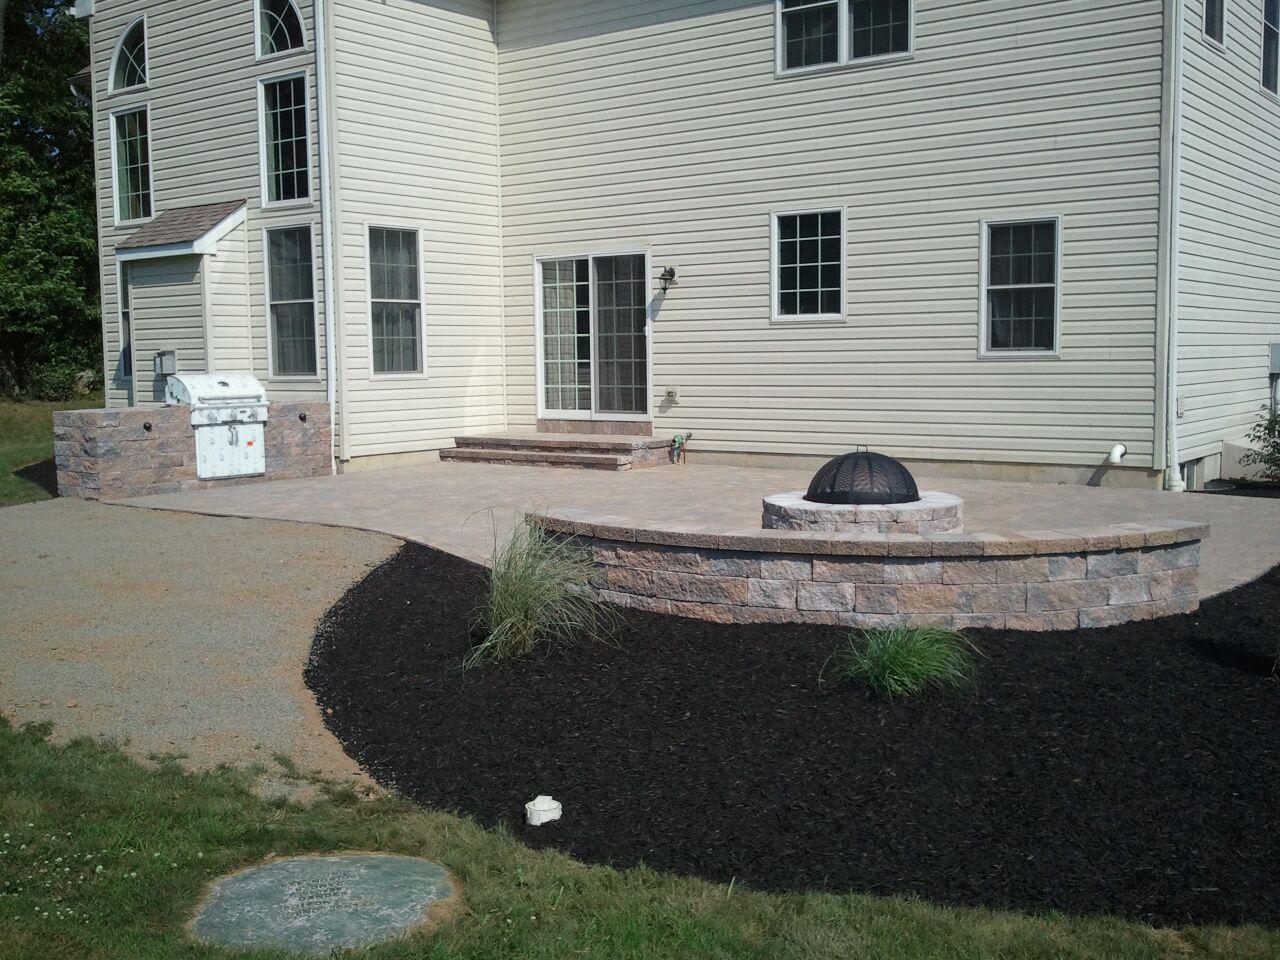 <a href="https://a1hardscape.com/services/#hardscaping" class="service-btn">Learn More</a>